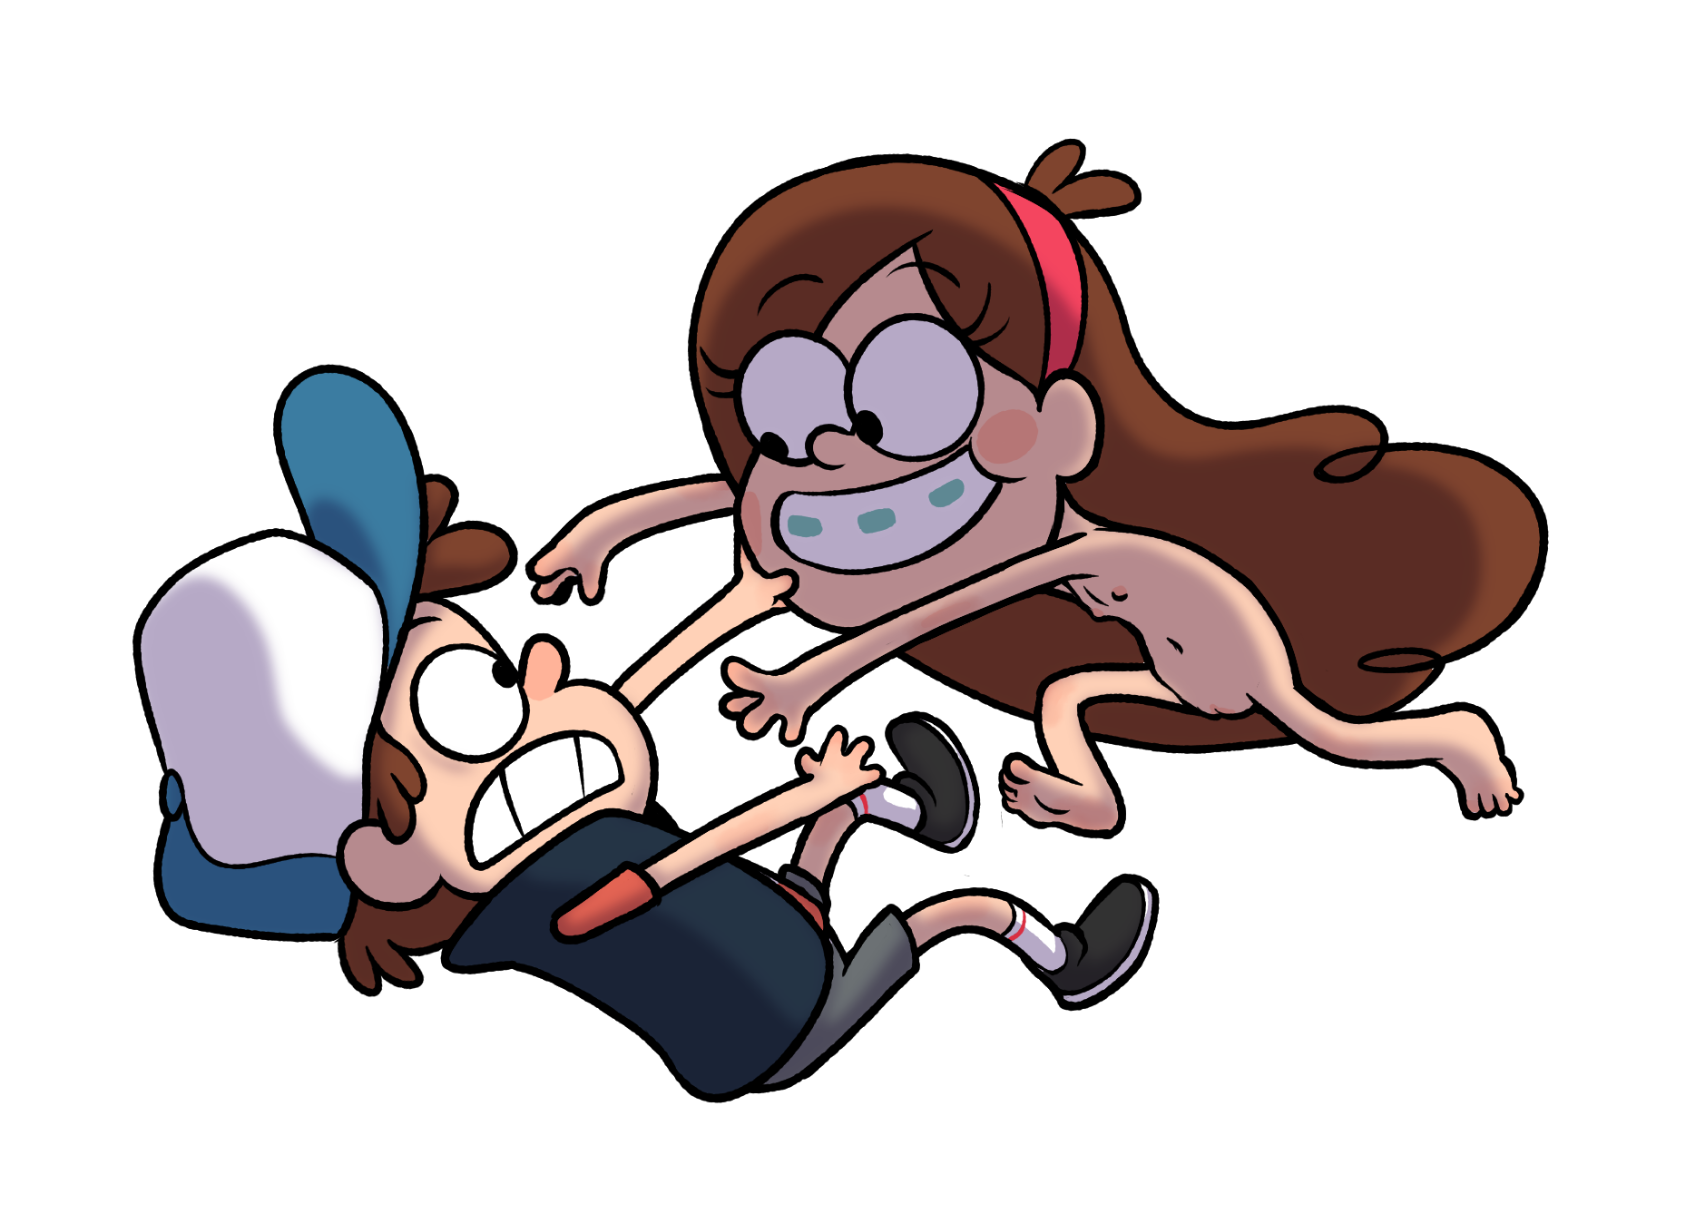 danielle leatham recommends Gravity Falls Mabel Nude